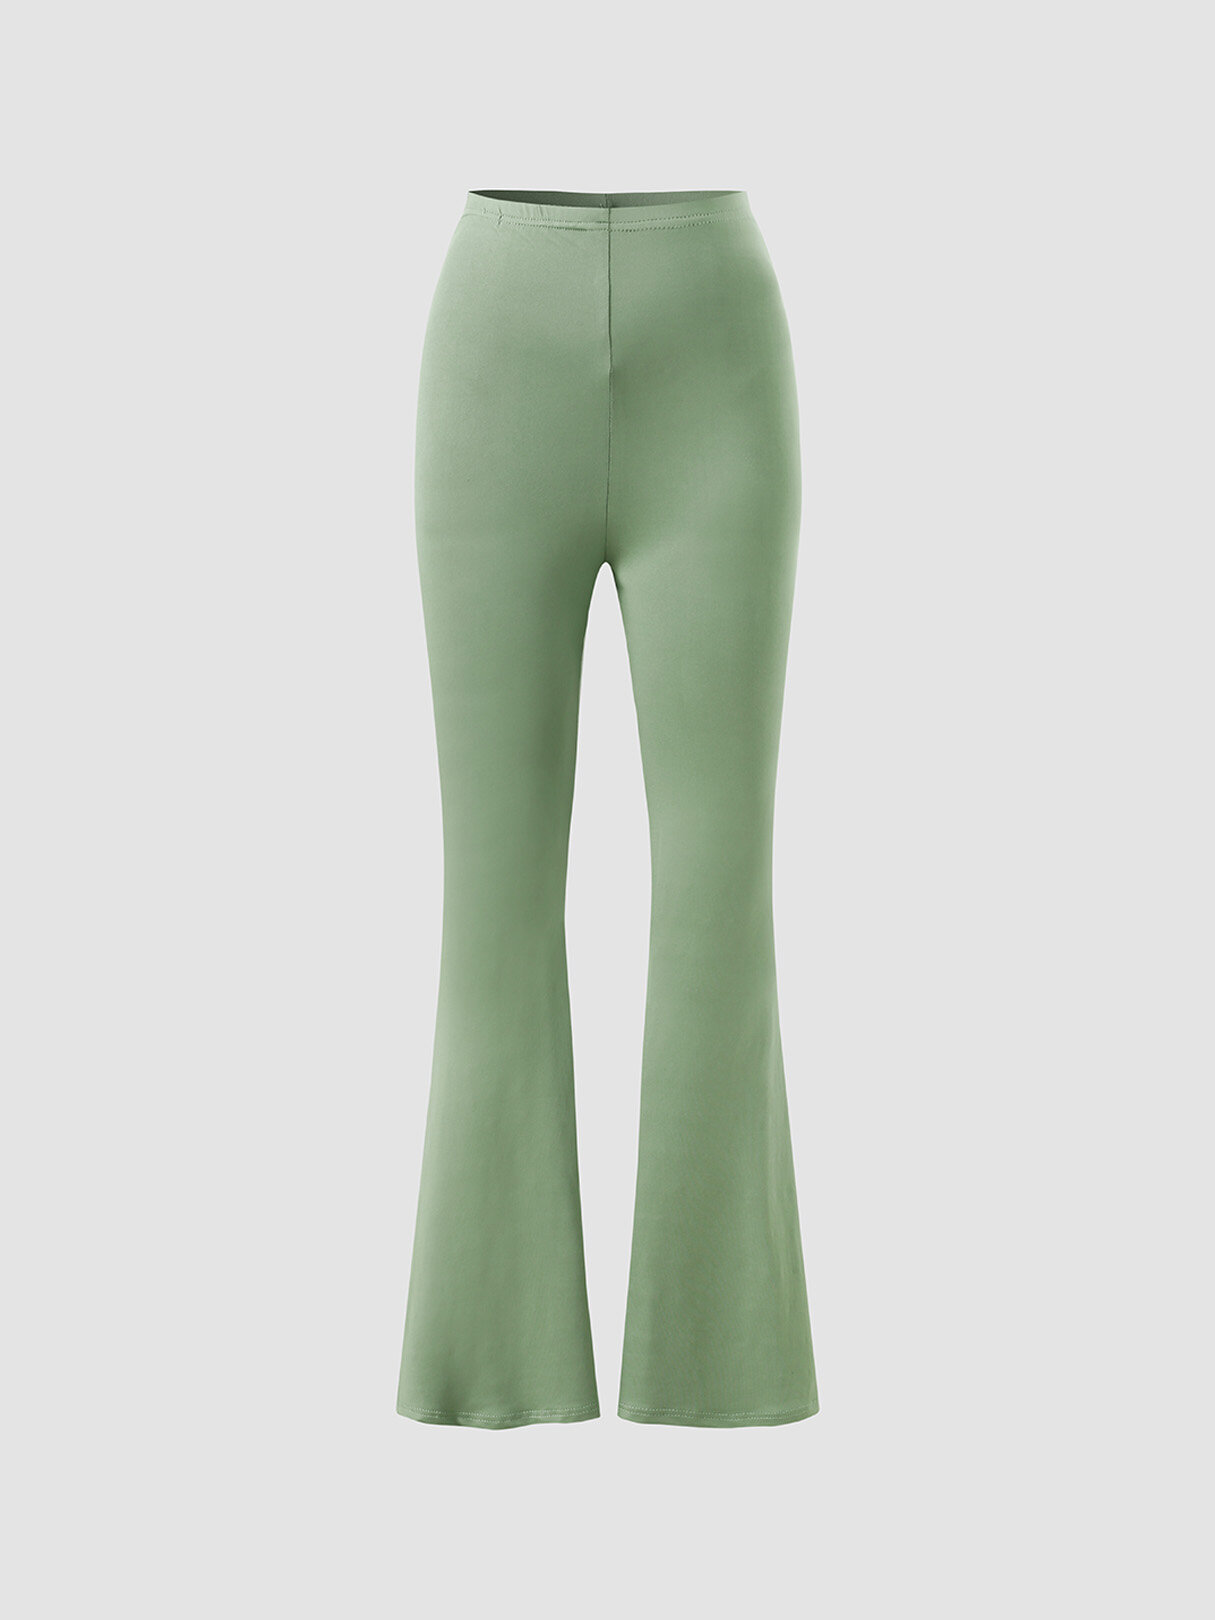 Solid High Waist Flare Pants